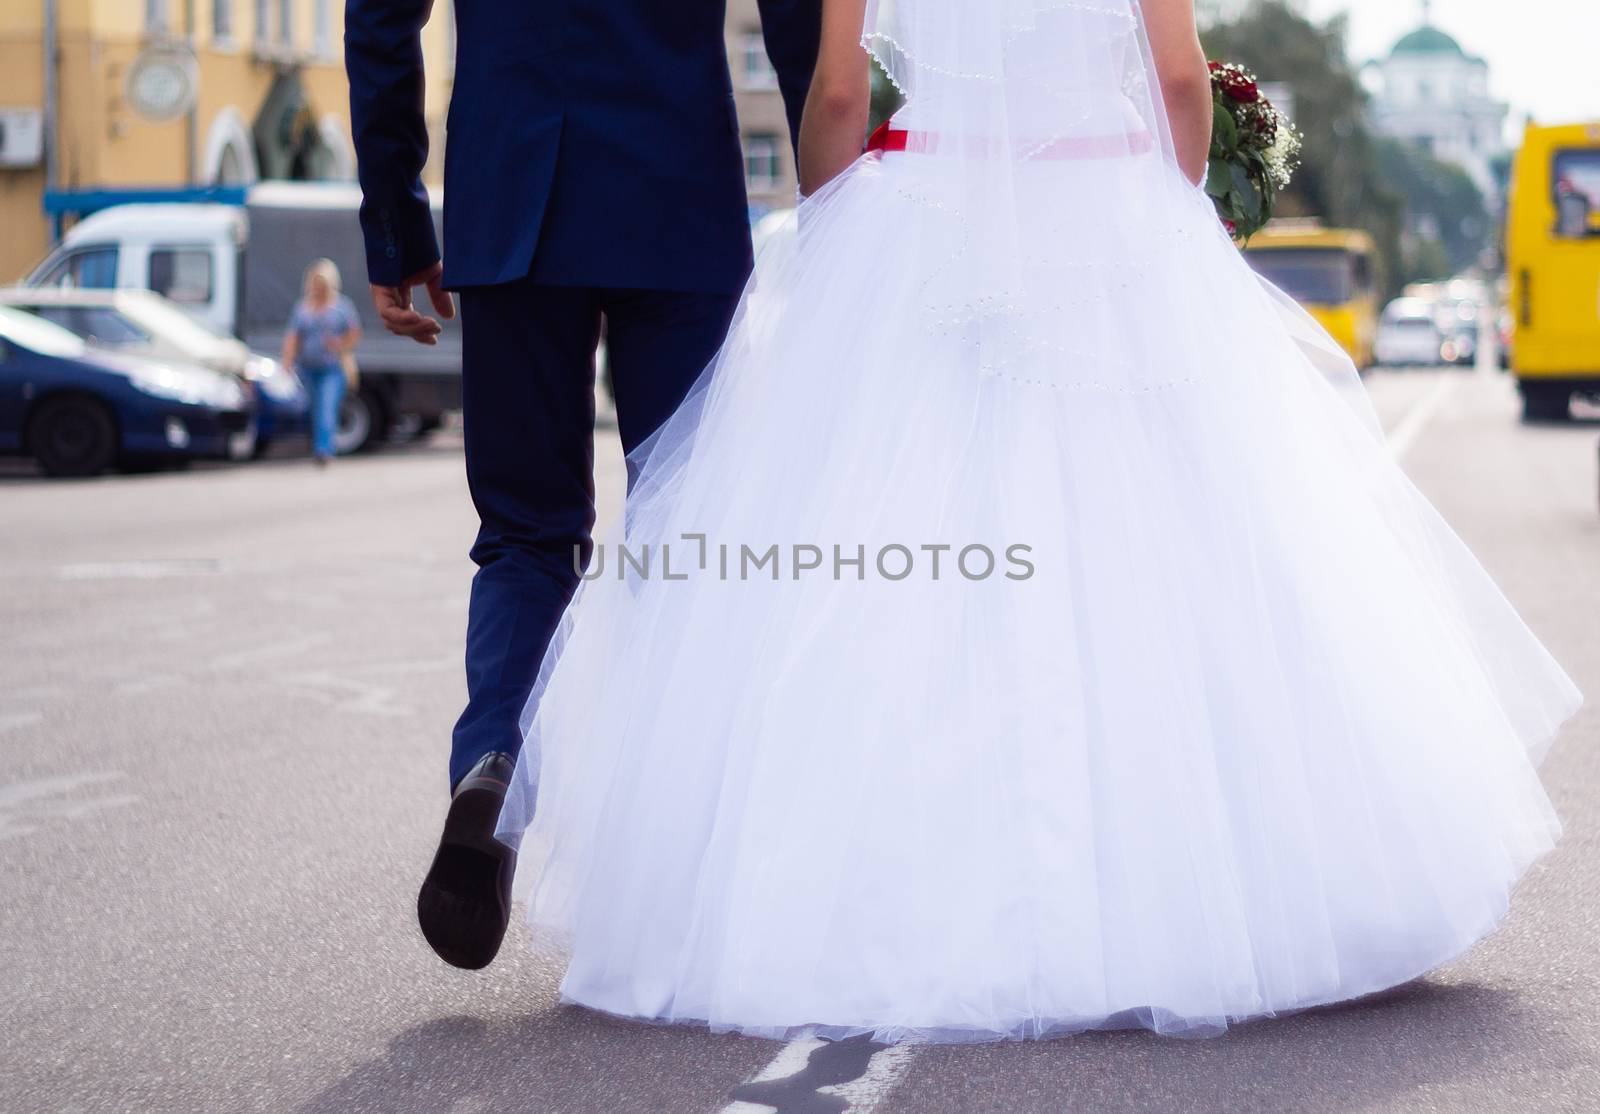 The bride and groom hold  hands themselves while they walking on the road in city. Wedding in detail.